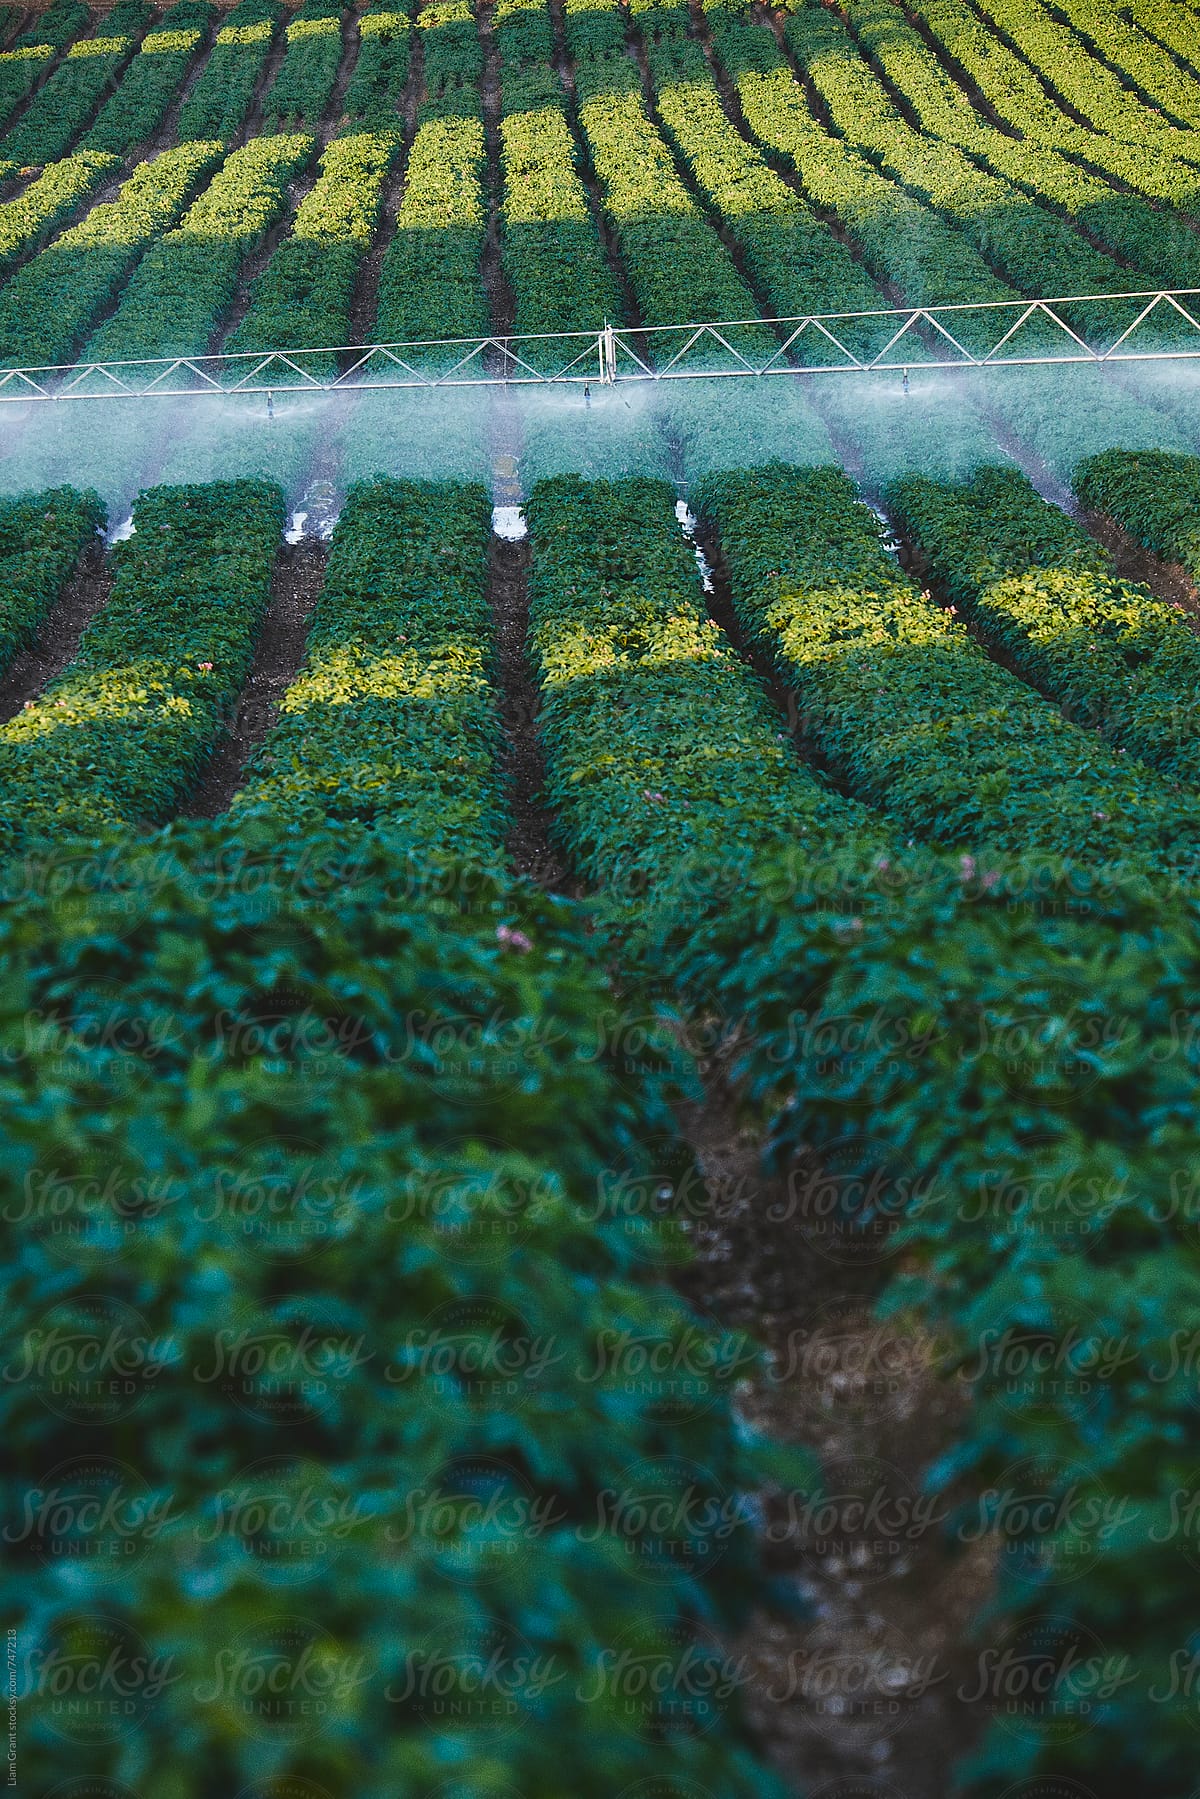 Irrigation system watering rows of potato plants at sunset. Norfok, UK.